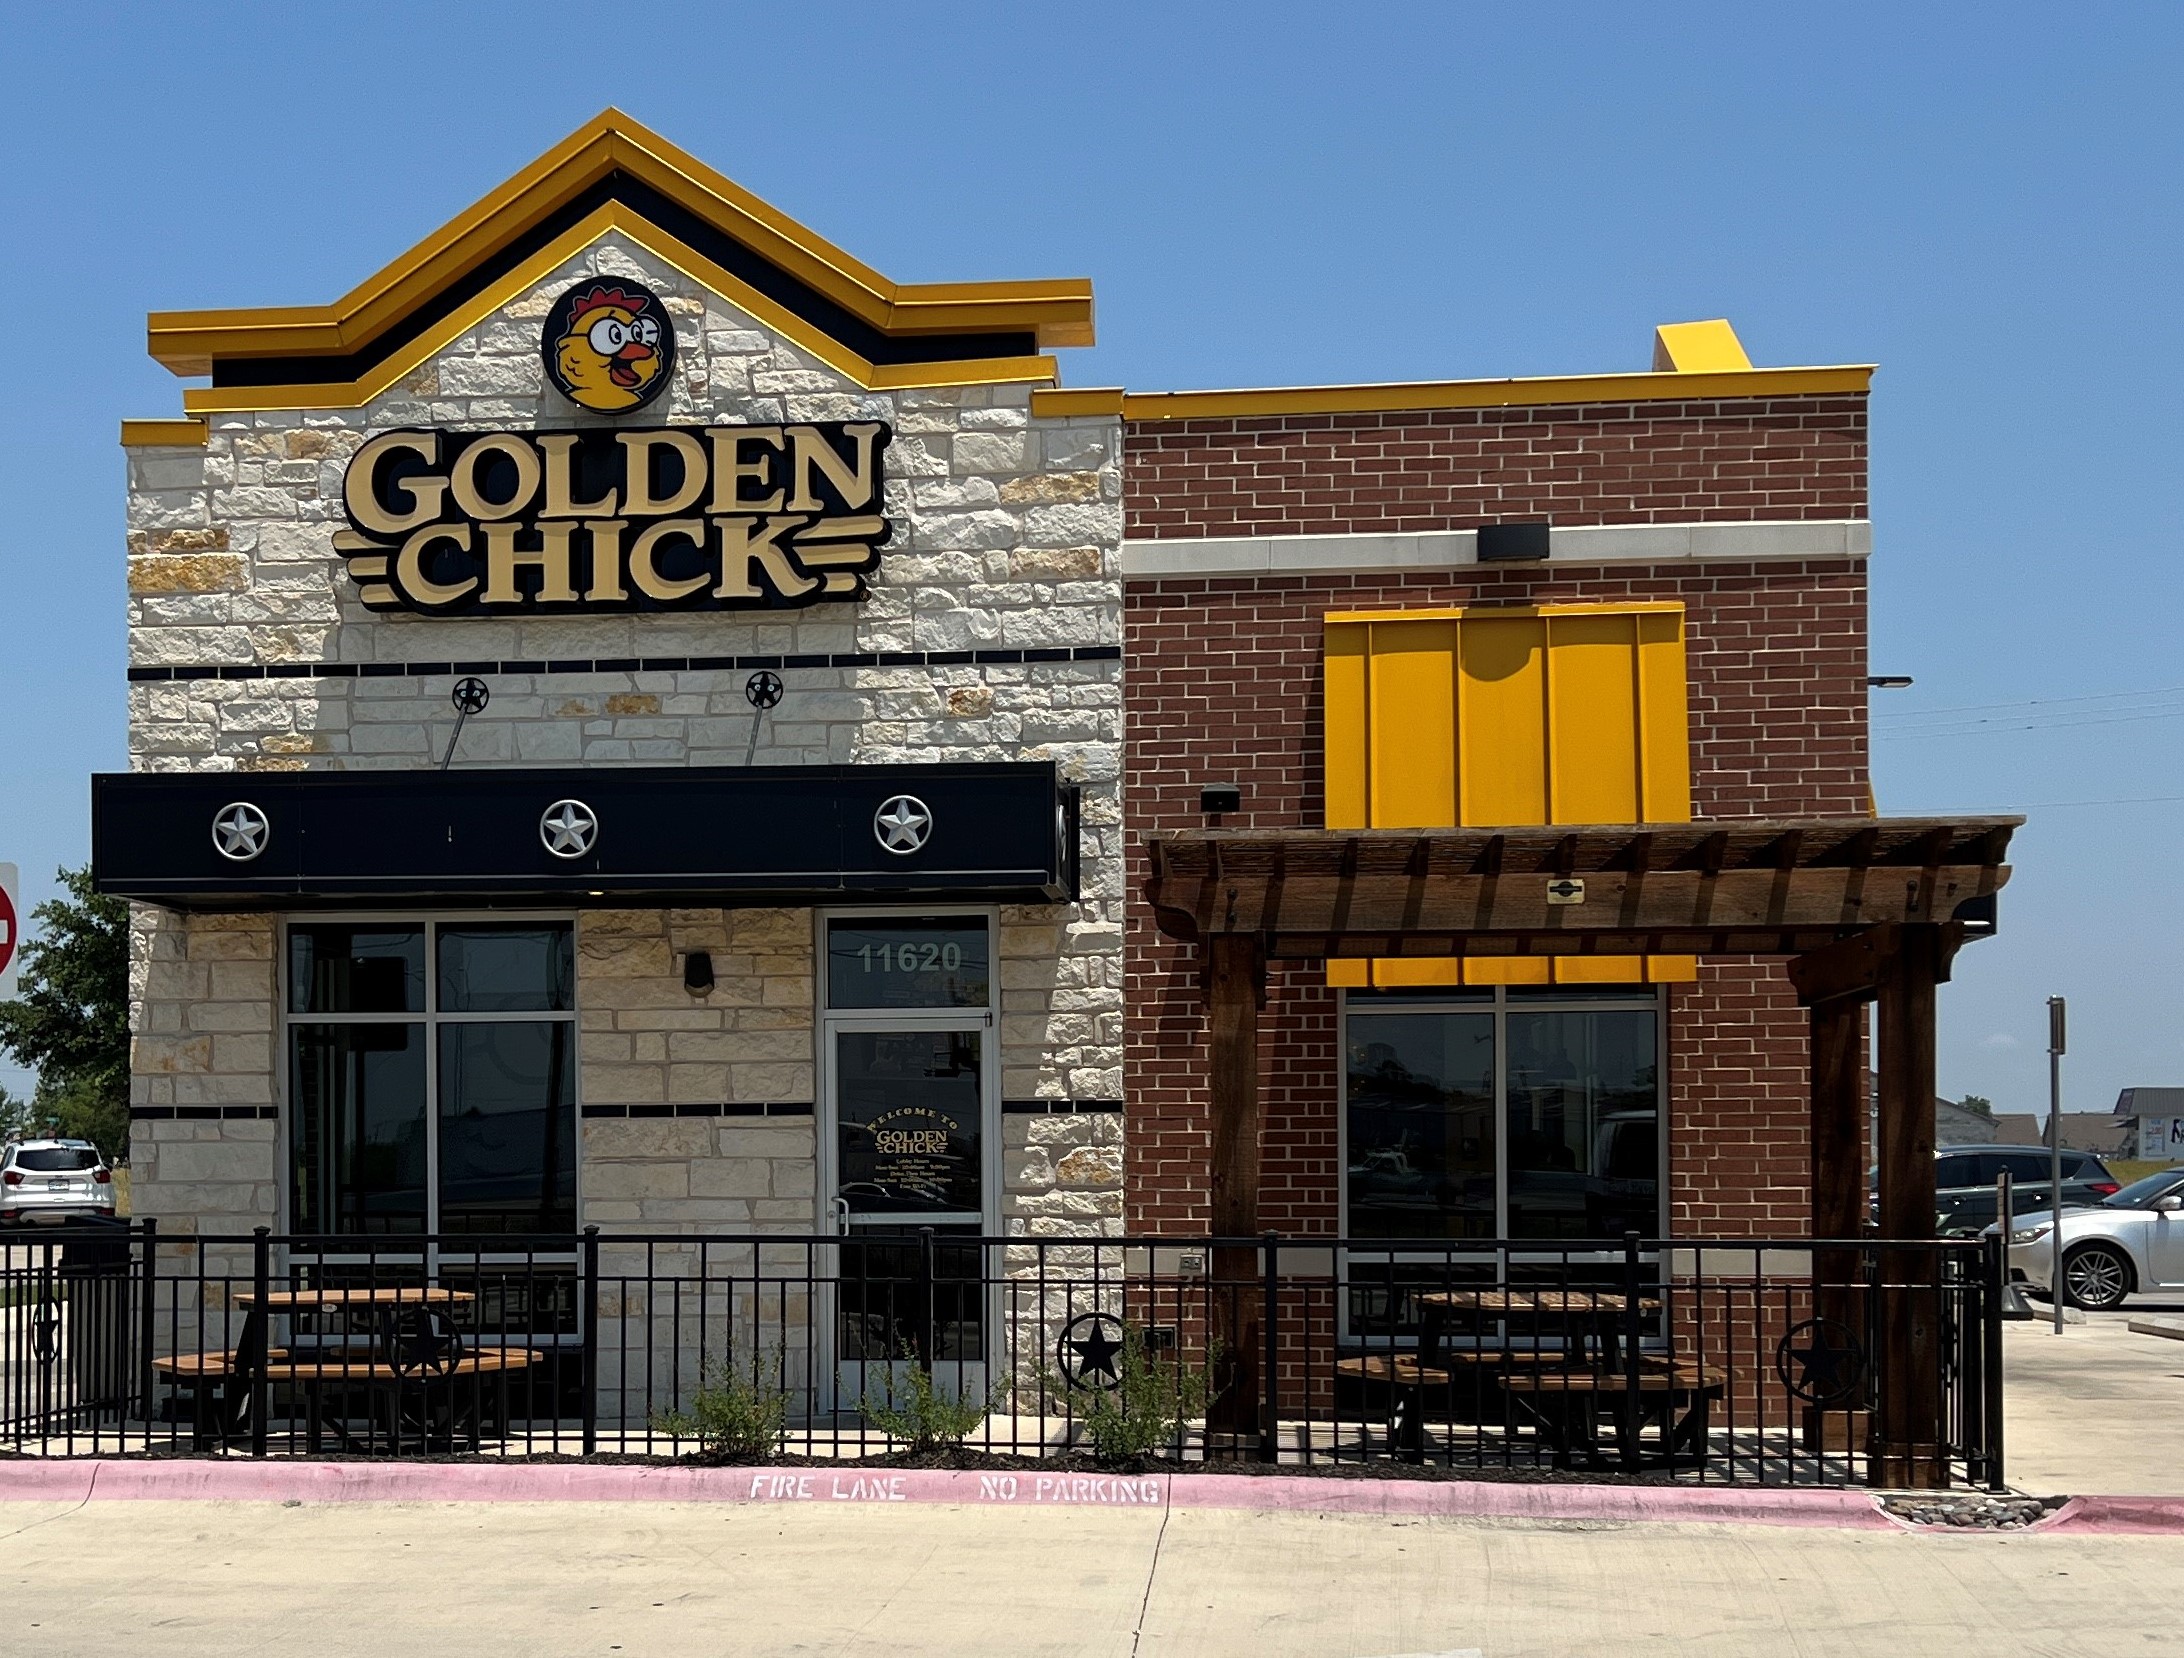 Golden Chick storefront.  Your local Golden Chick fast food restaurant in Jarrell, Texas